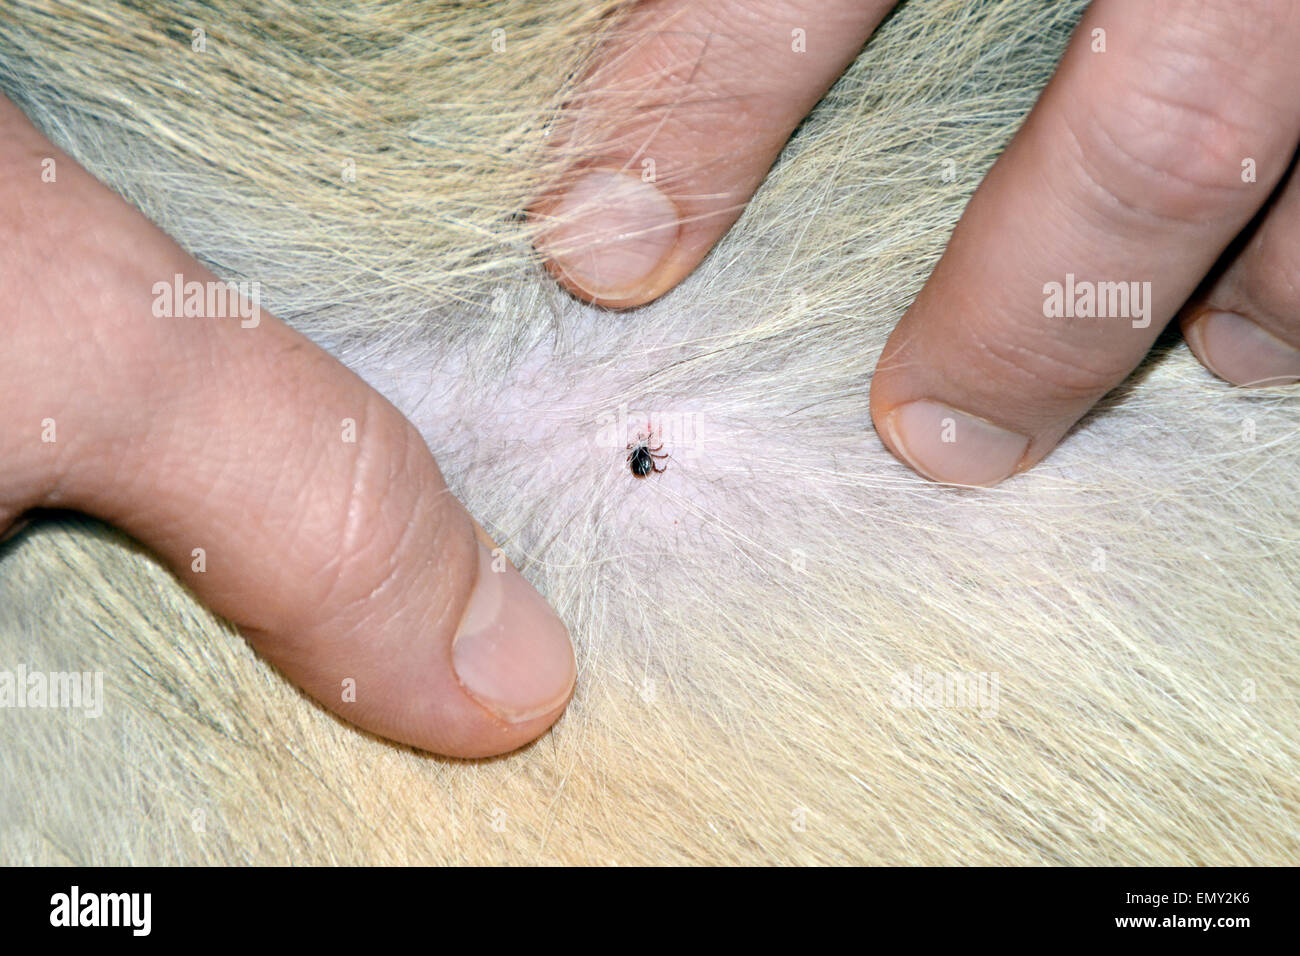 Man parting dog fur to expose attached american dog tick to skin Stock Photo